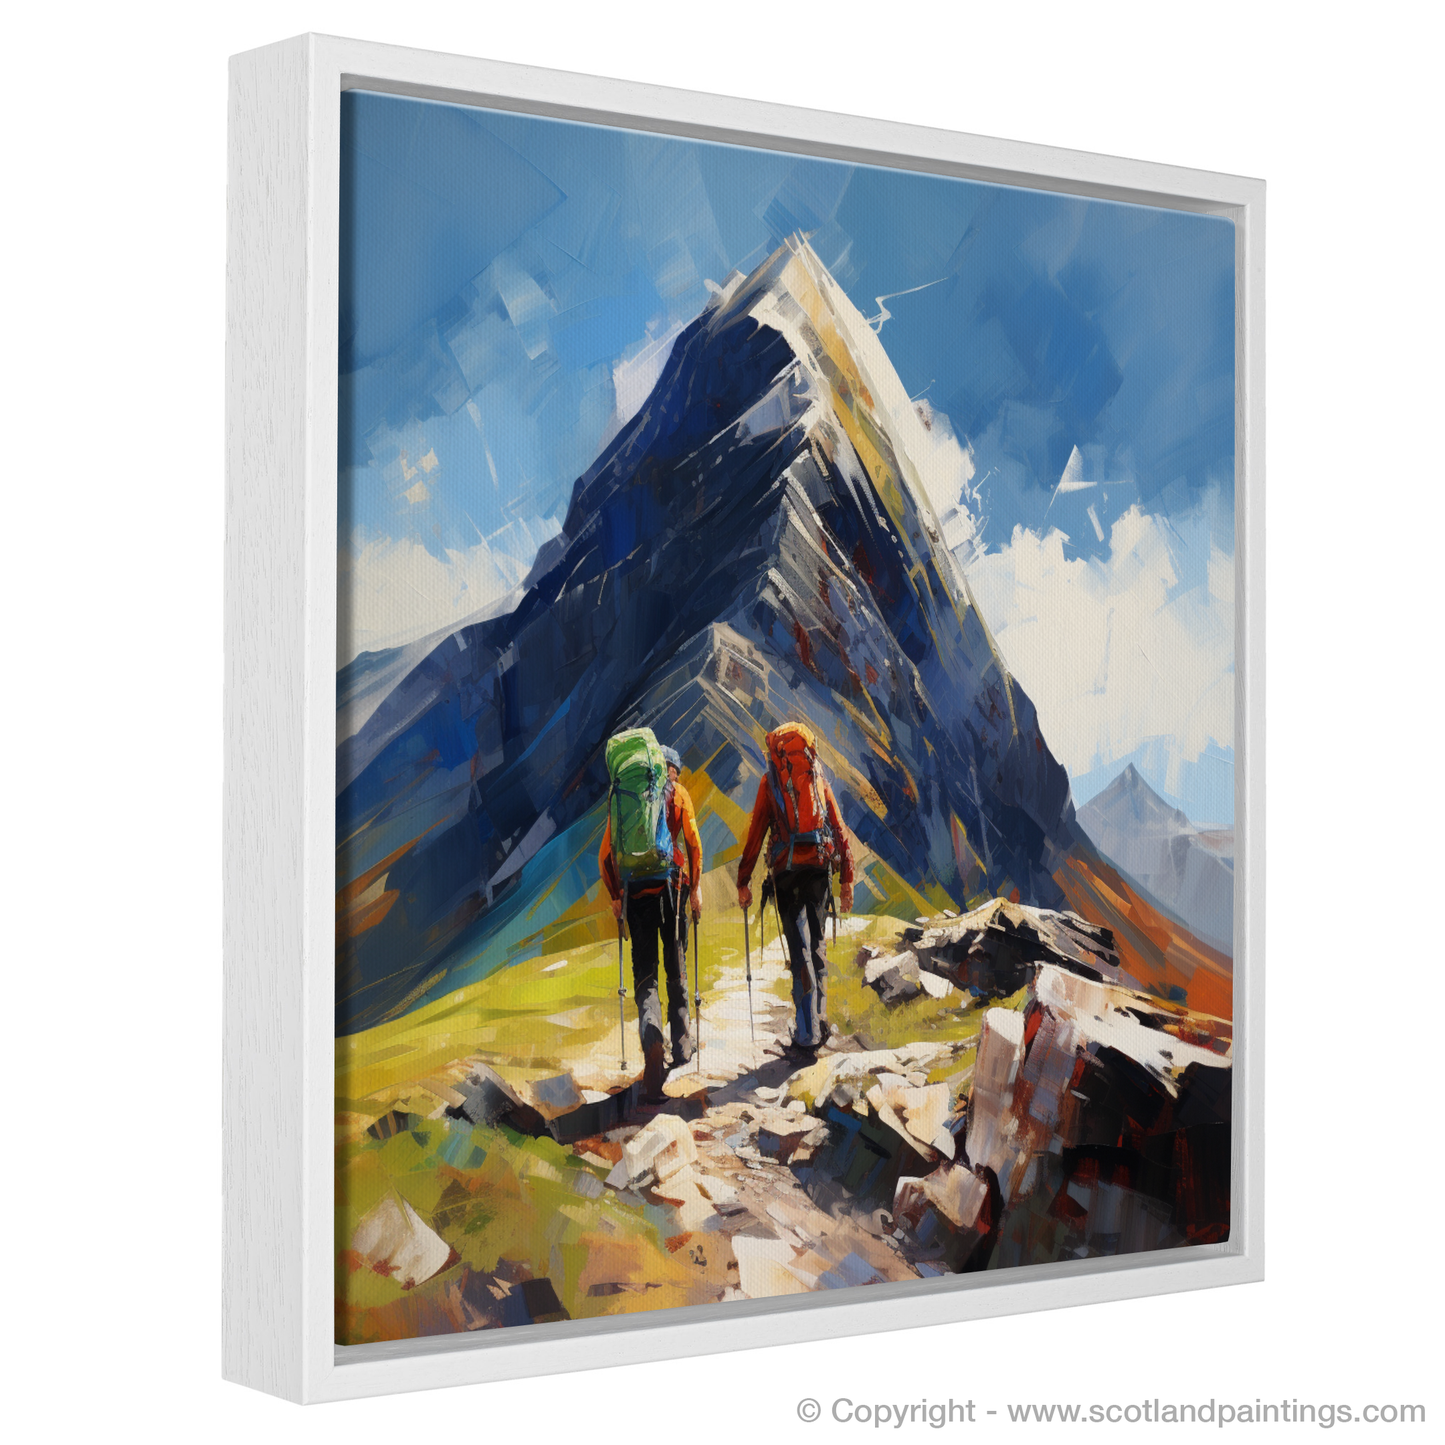 Painting and Art Print of Hikers at Buachaille summit in Glencoe entitled "Hikers Ascent to Buachaille Summit: An Expressionist Ode to Glencoe's Grandeur".